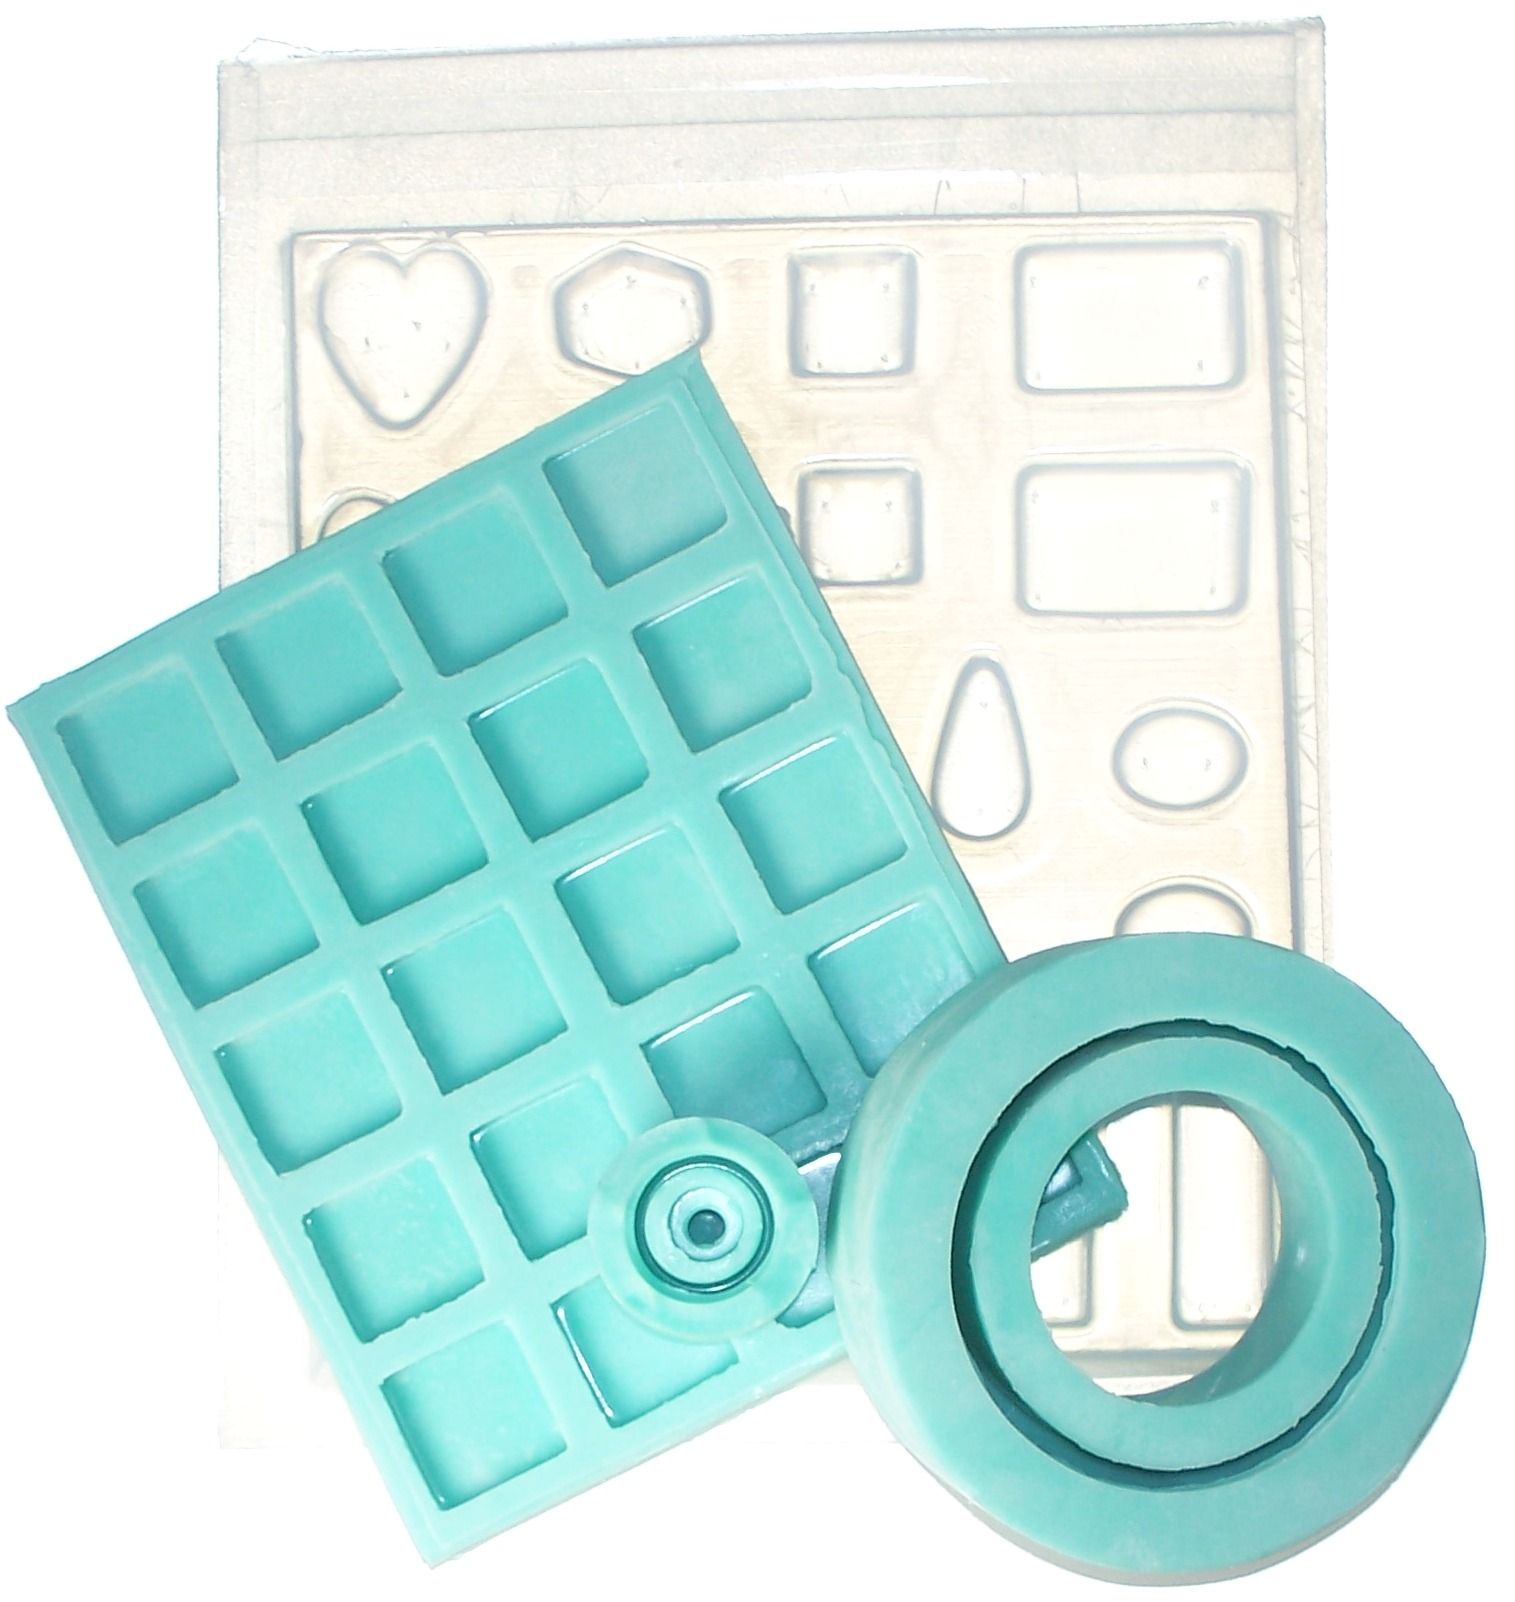 Silicone Vs Plastic Resin Molds: Which One to Use